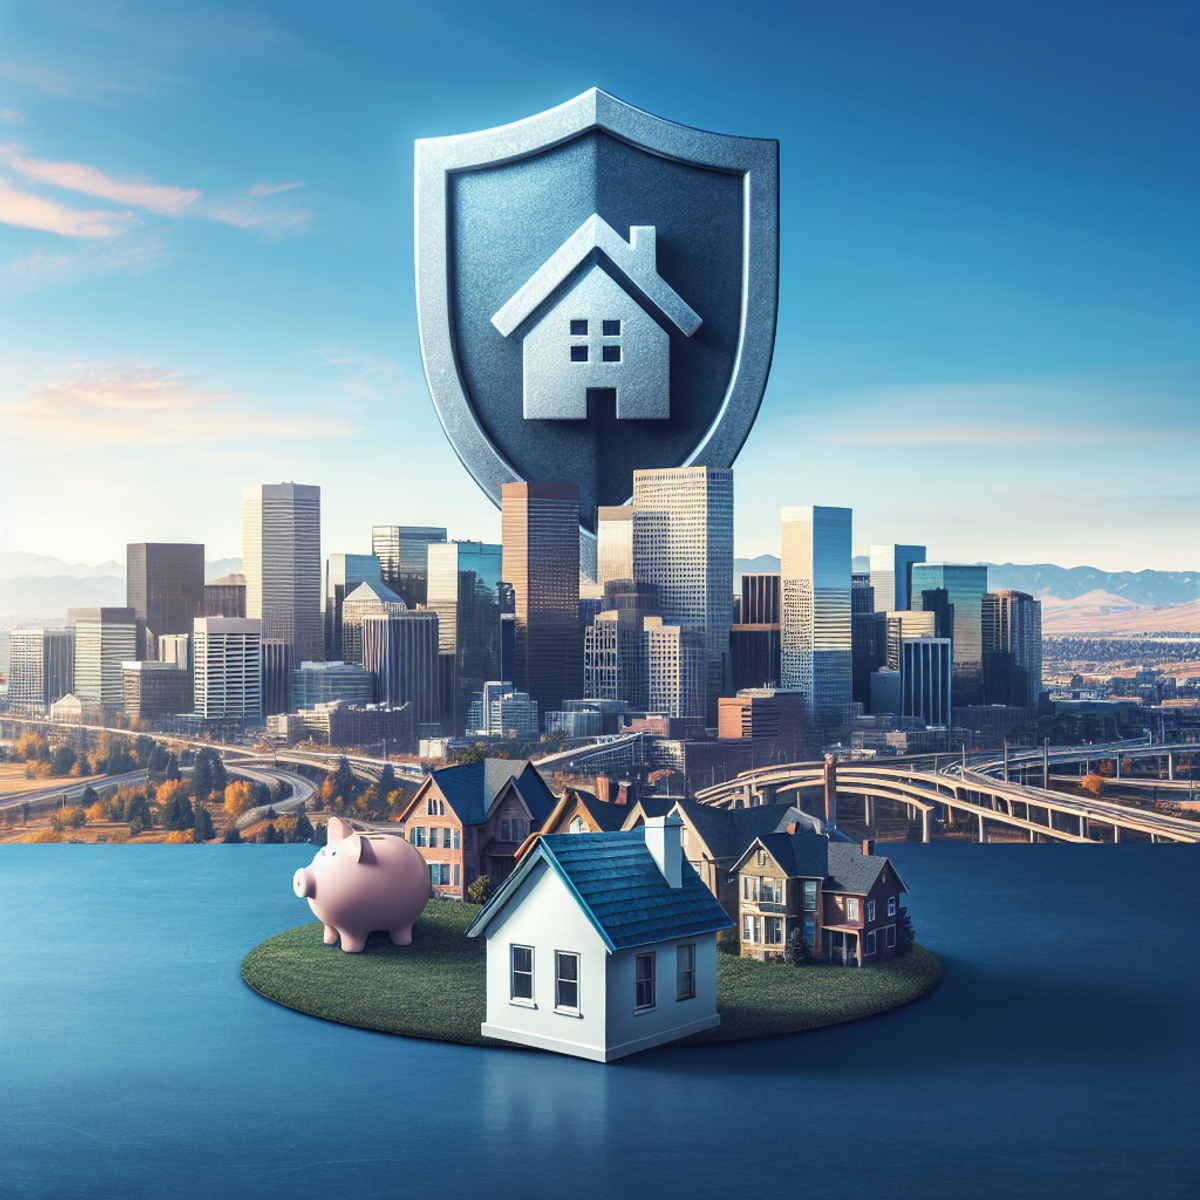 Alt text: A clear blue sky over the Denver skyline with a small house and piggy bank subtly integrated into the cityscape, symbolizing affordable home insurance and financial protection.